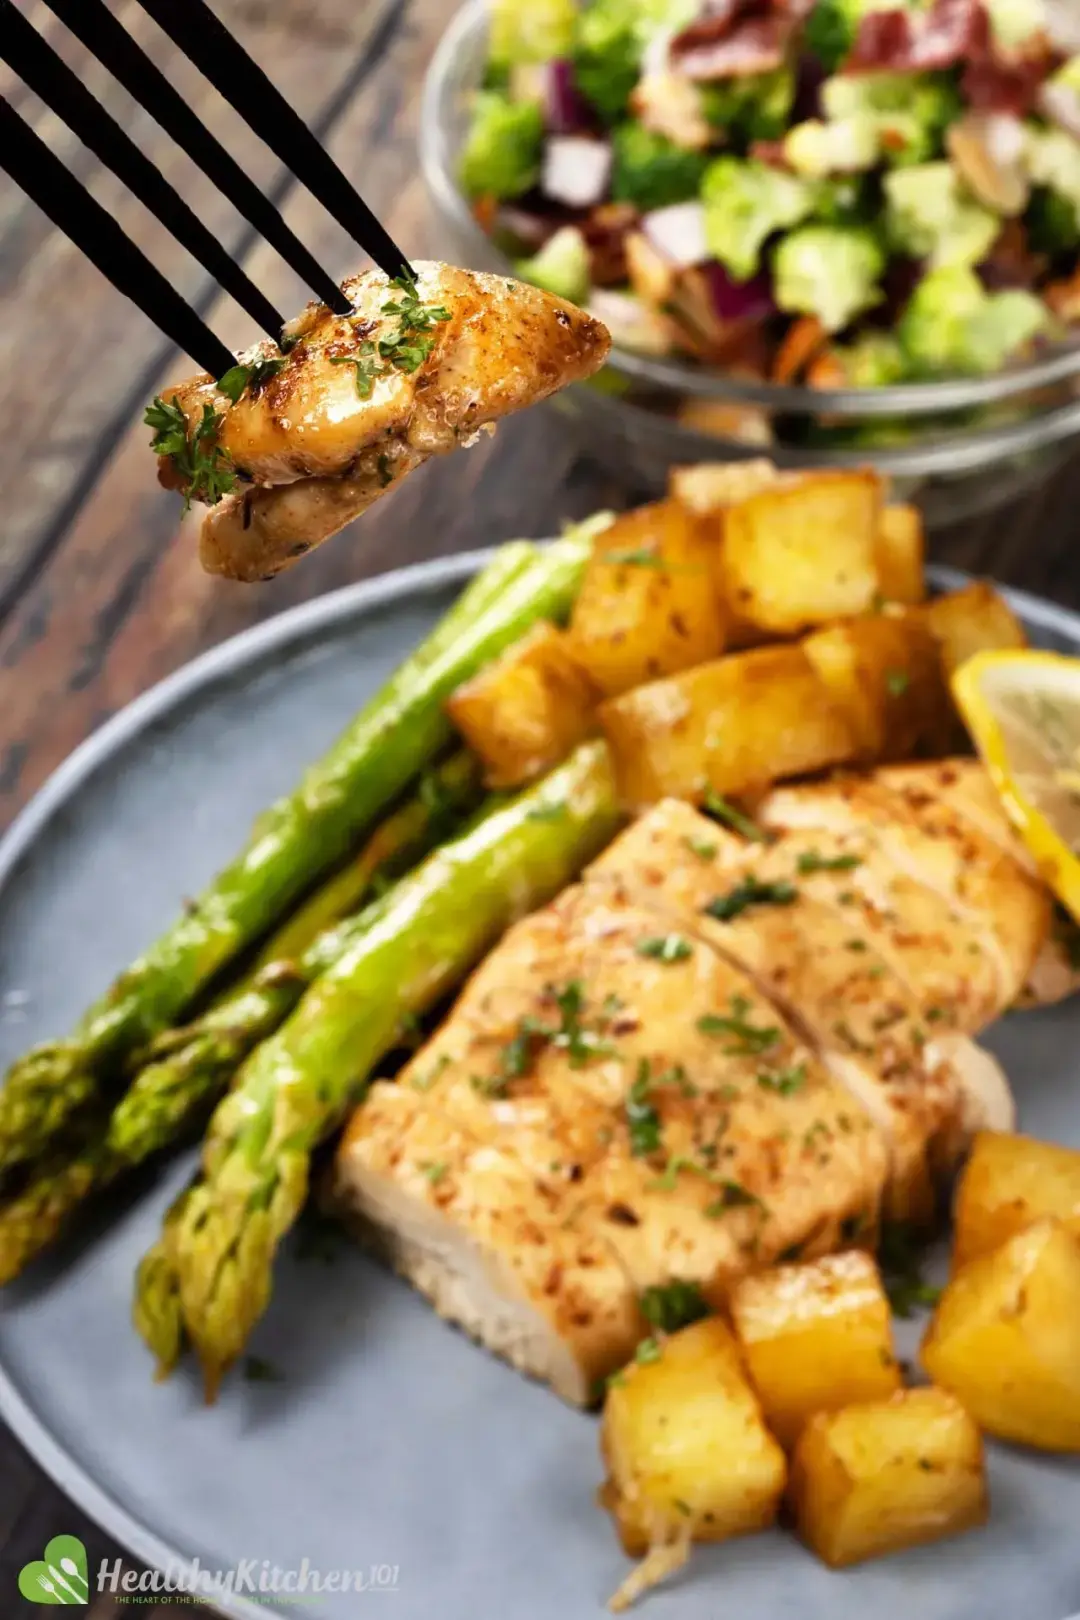 A piece of chicken held by a fork with a plate containing asparagus, potato cubes, and a piece of chicken breast in the back